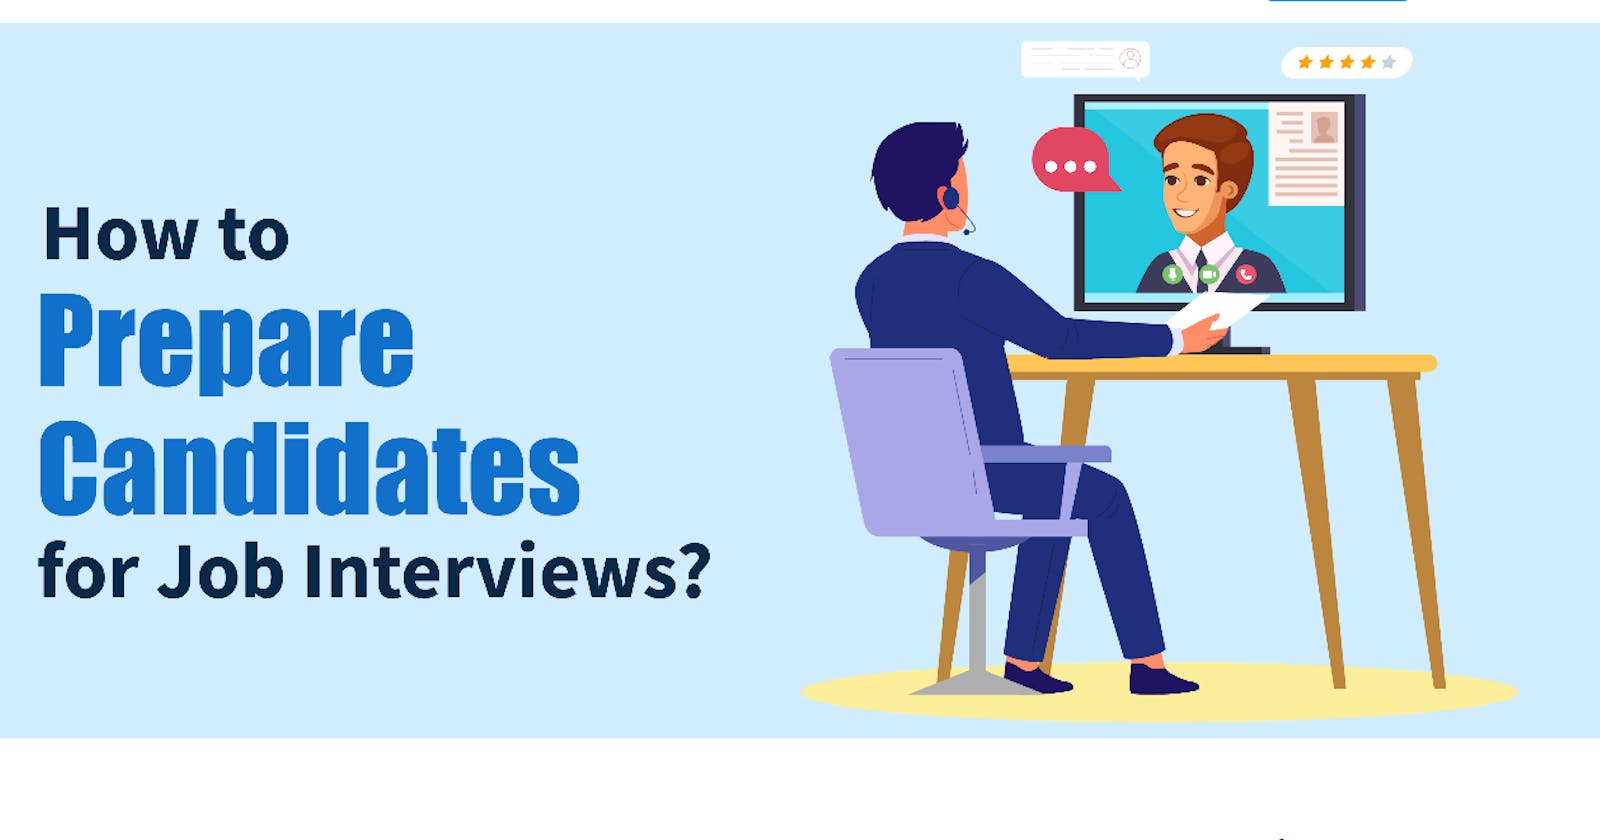 How to Prepare Candidates for Job Interviews?